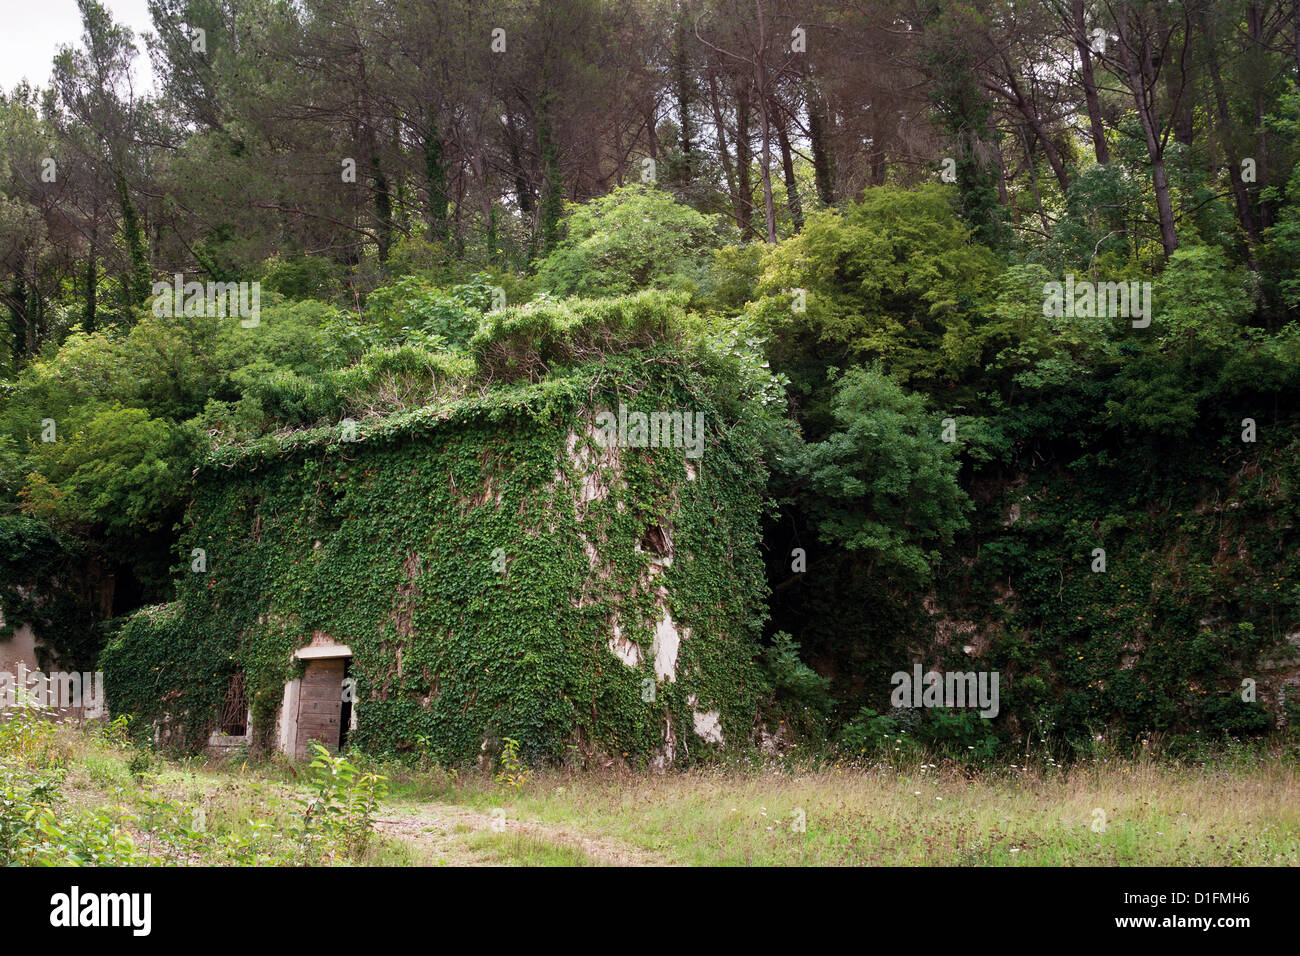 Abandoned residential house covered with green vegetation Stock Photo